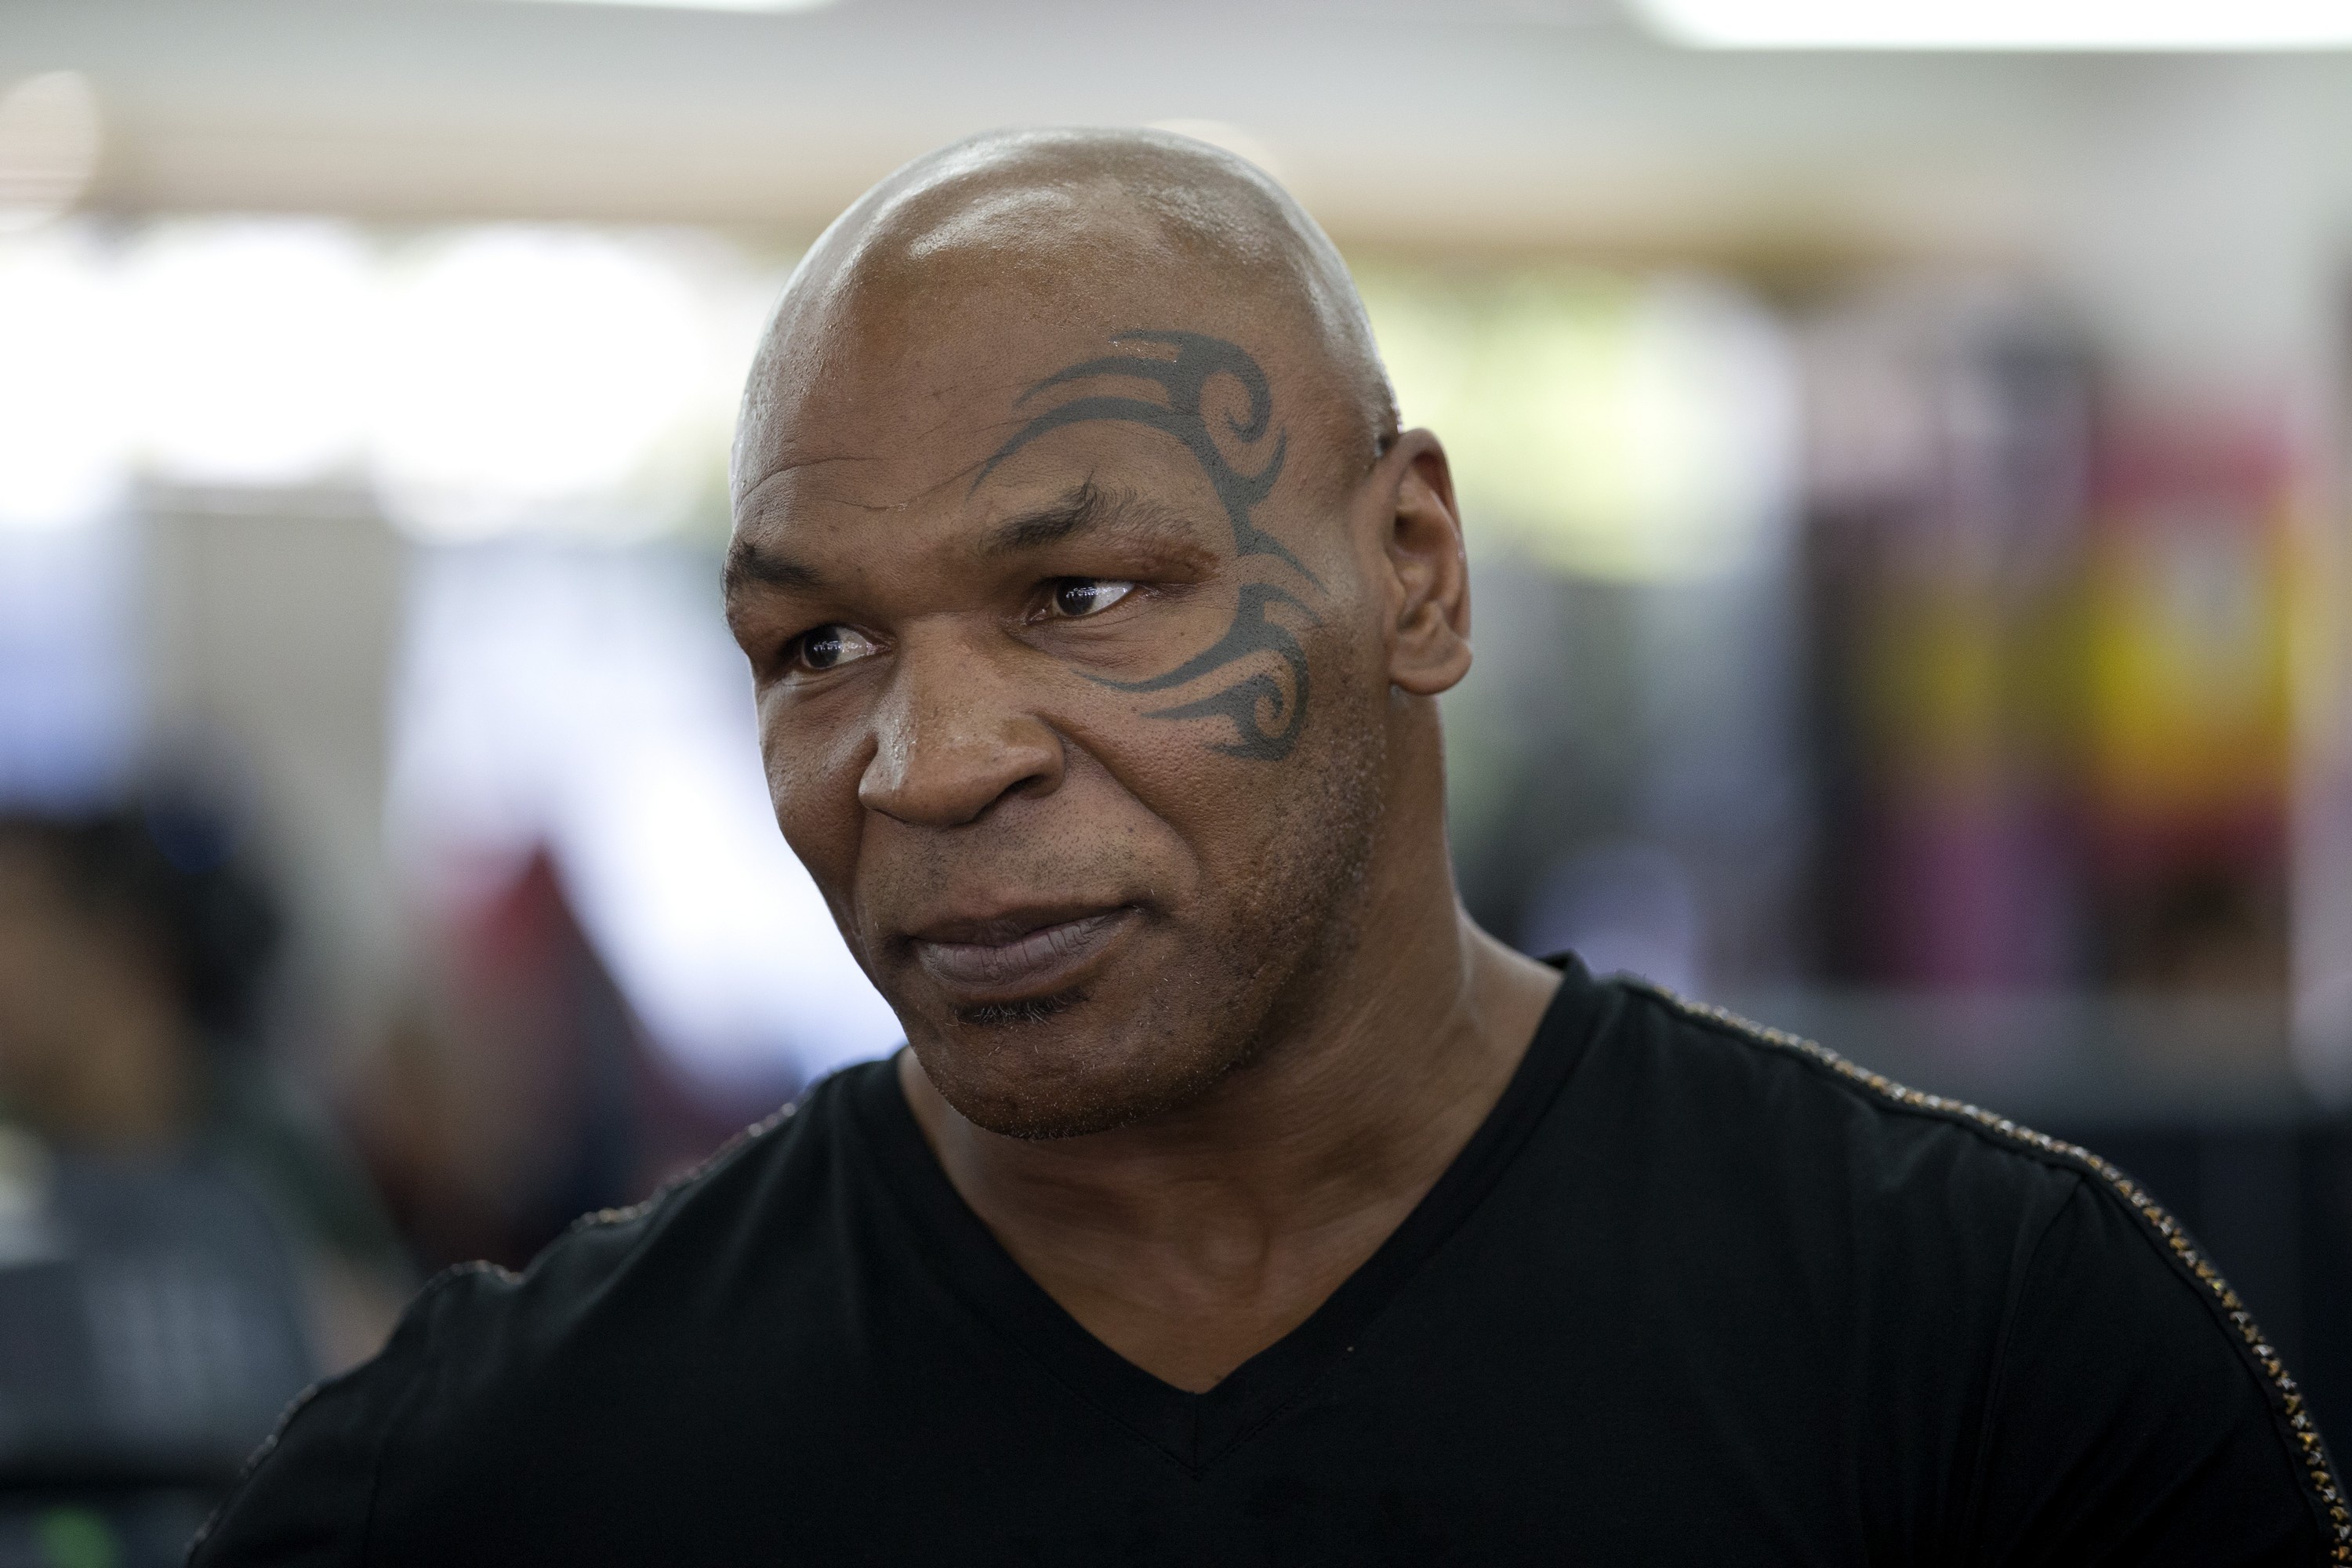 celebrity, mike tyson, actor, american, boxer, tattoo